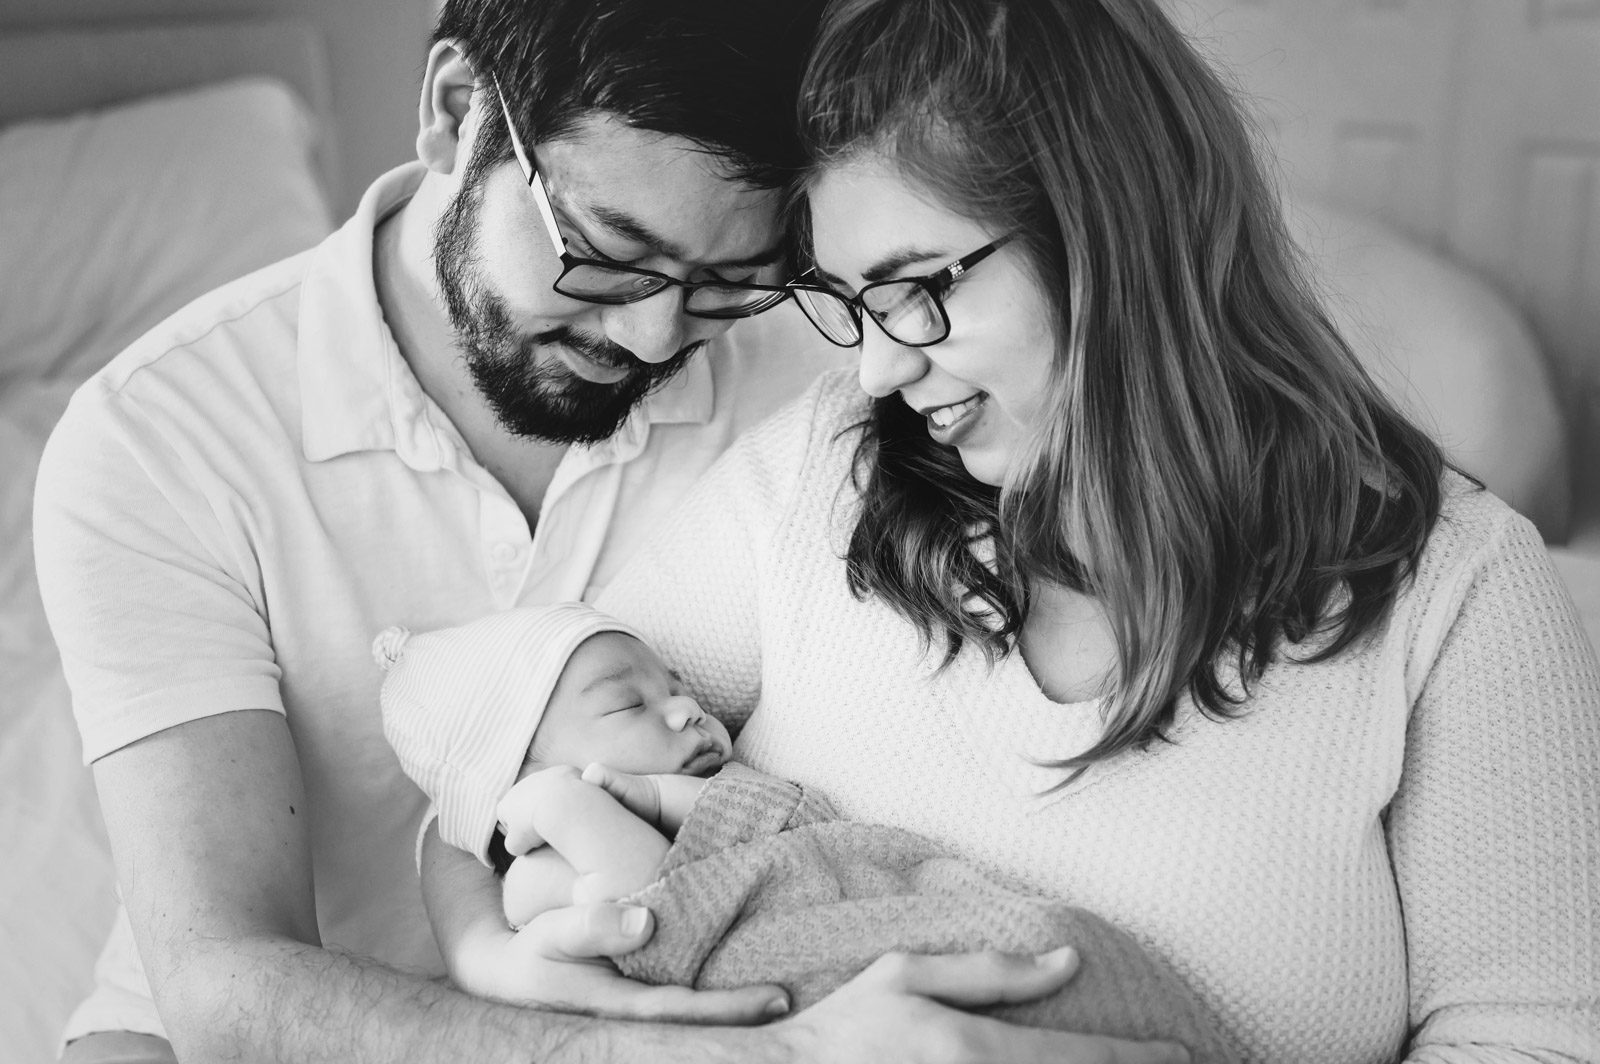 black and white image of new parents holding their newborn baby boy in their arms and smiling down at him during a reading newborn photoshoot